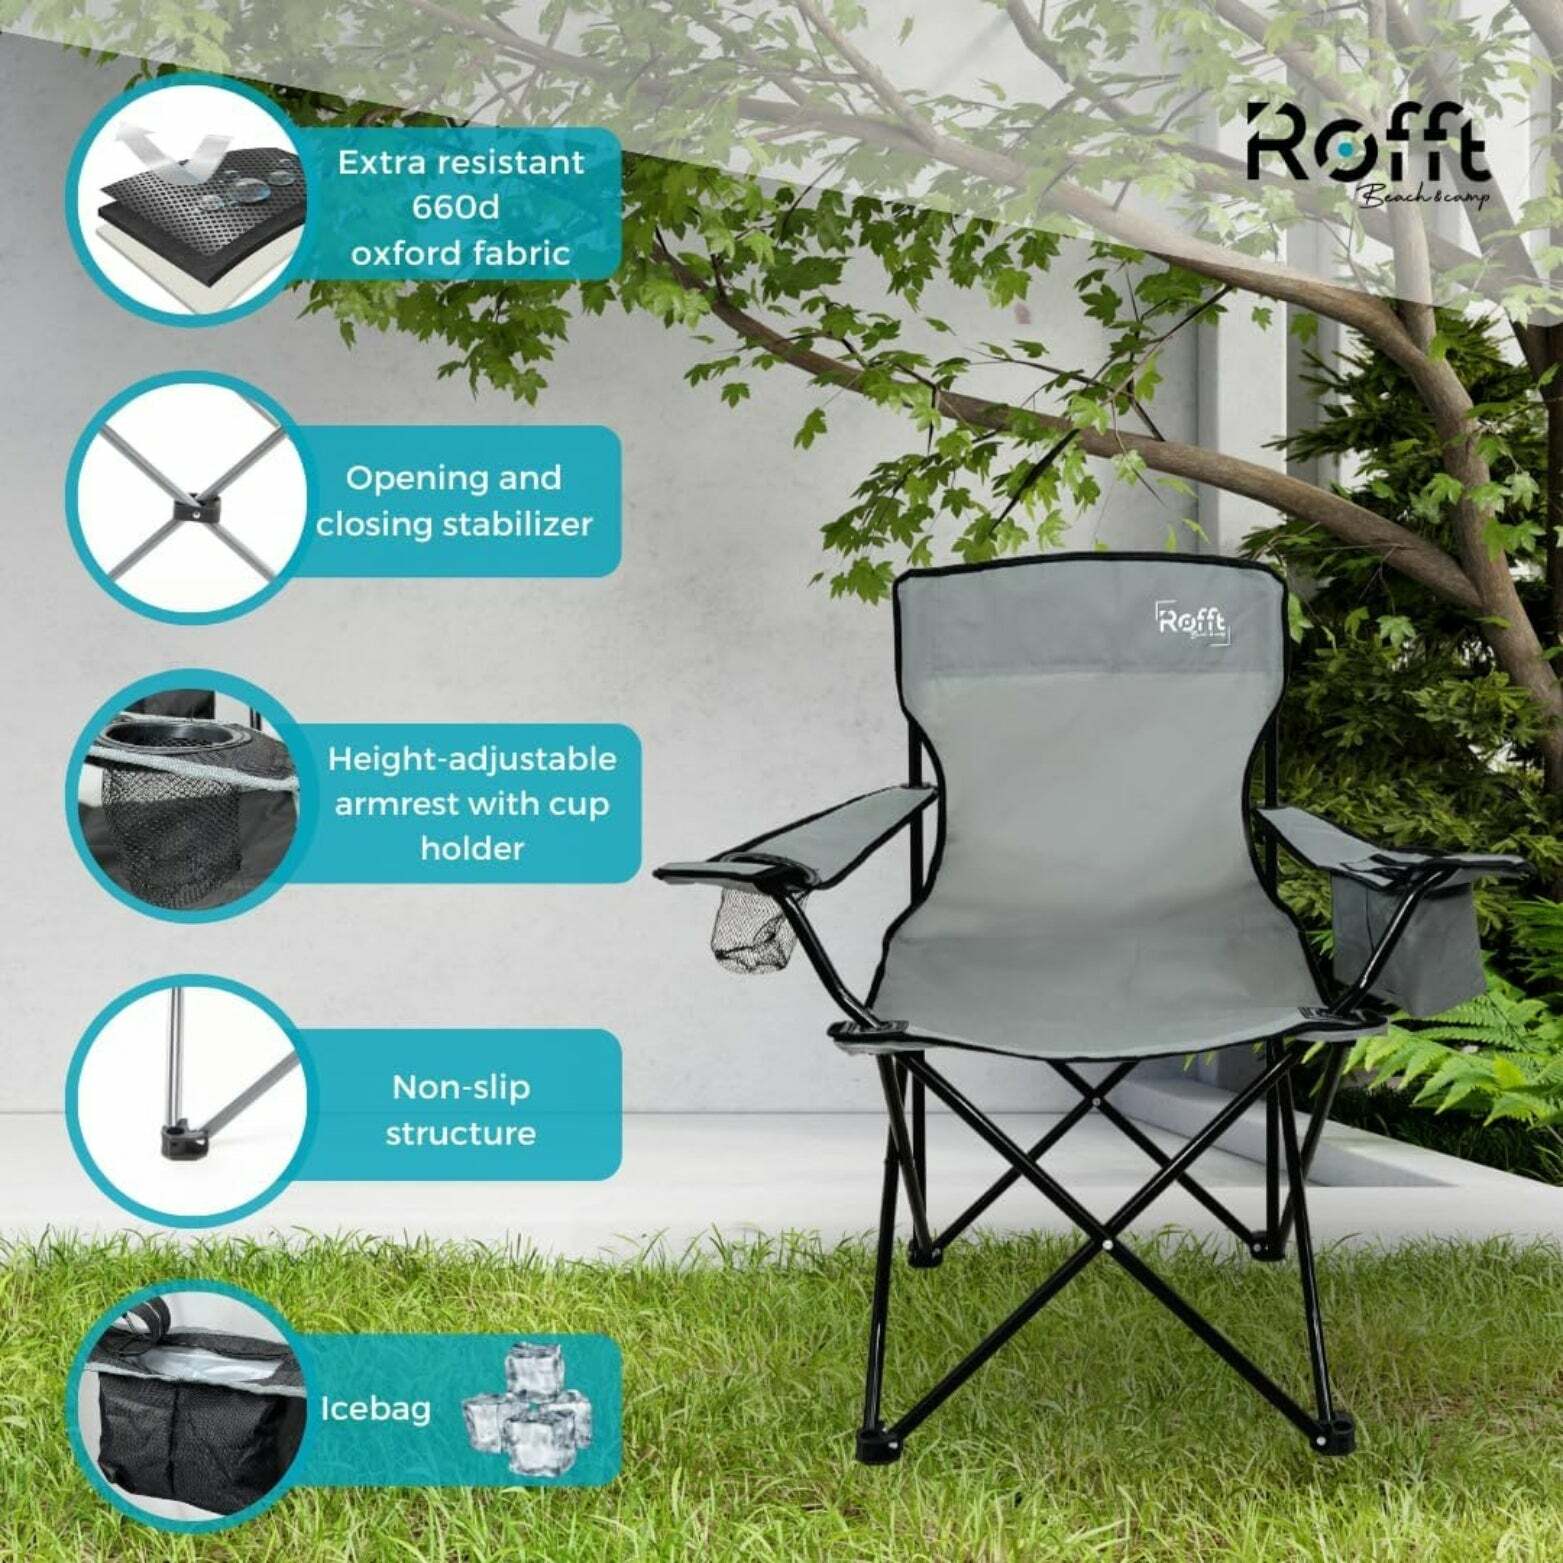 ROFFT Portable Camping Chair - Cooler Pocket, Cup Holder, Alloy Steel Frame - Gray